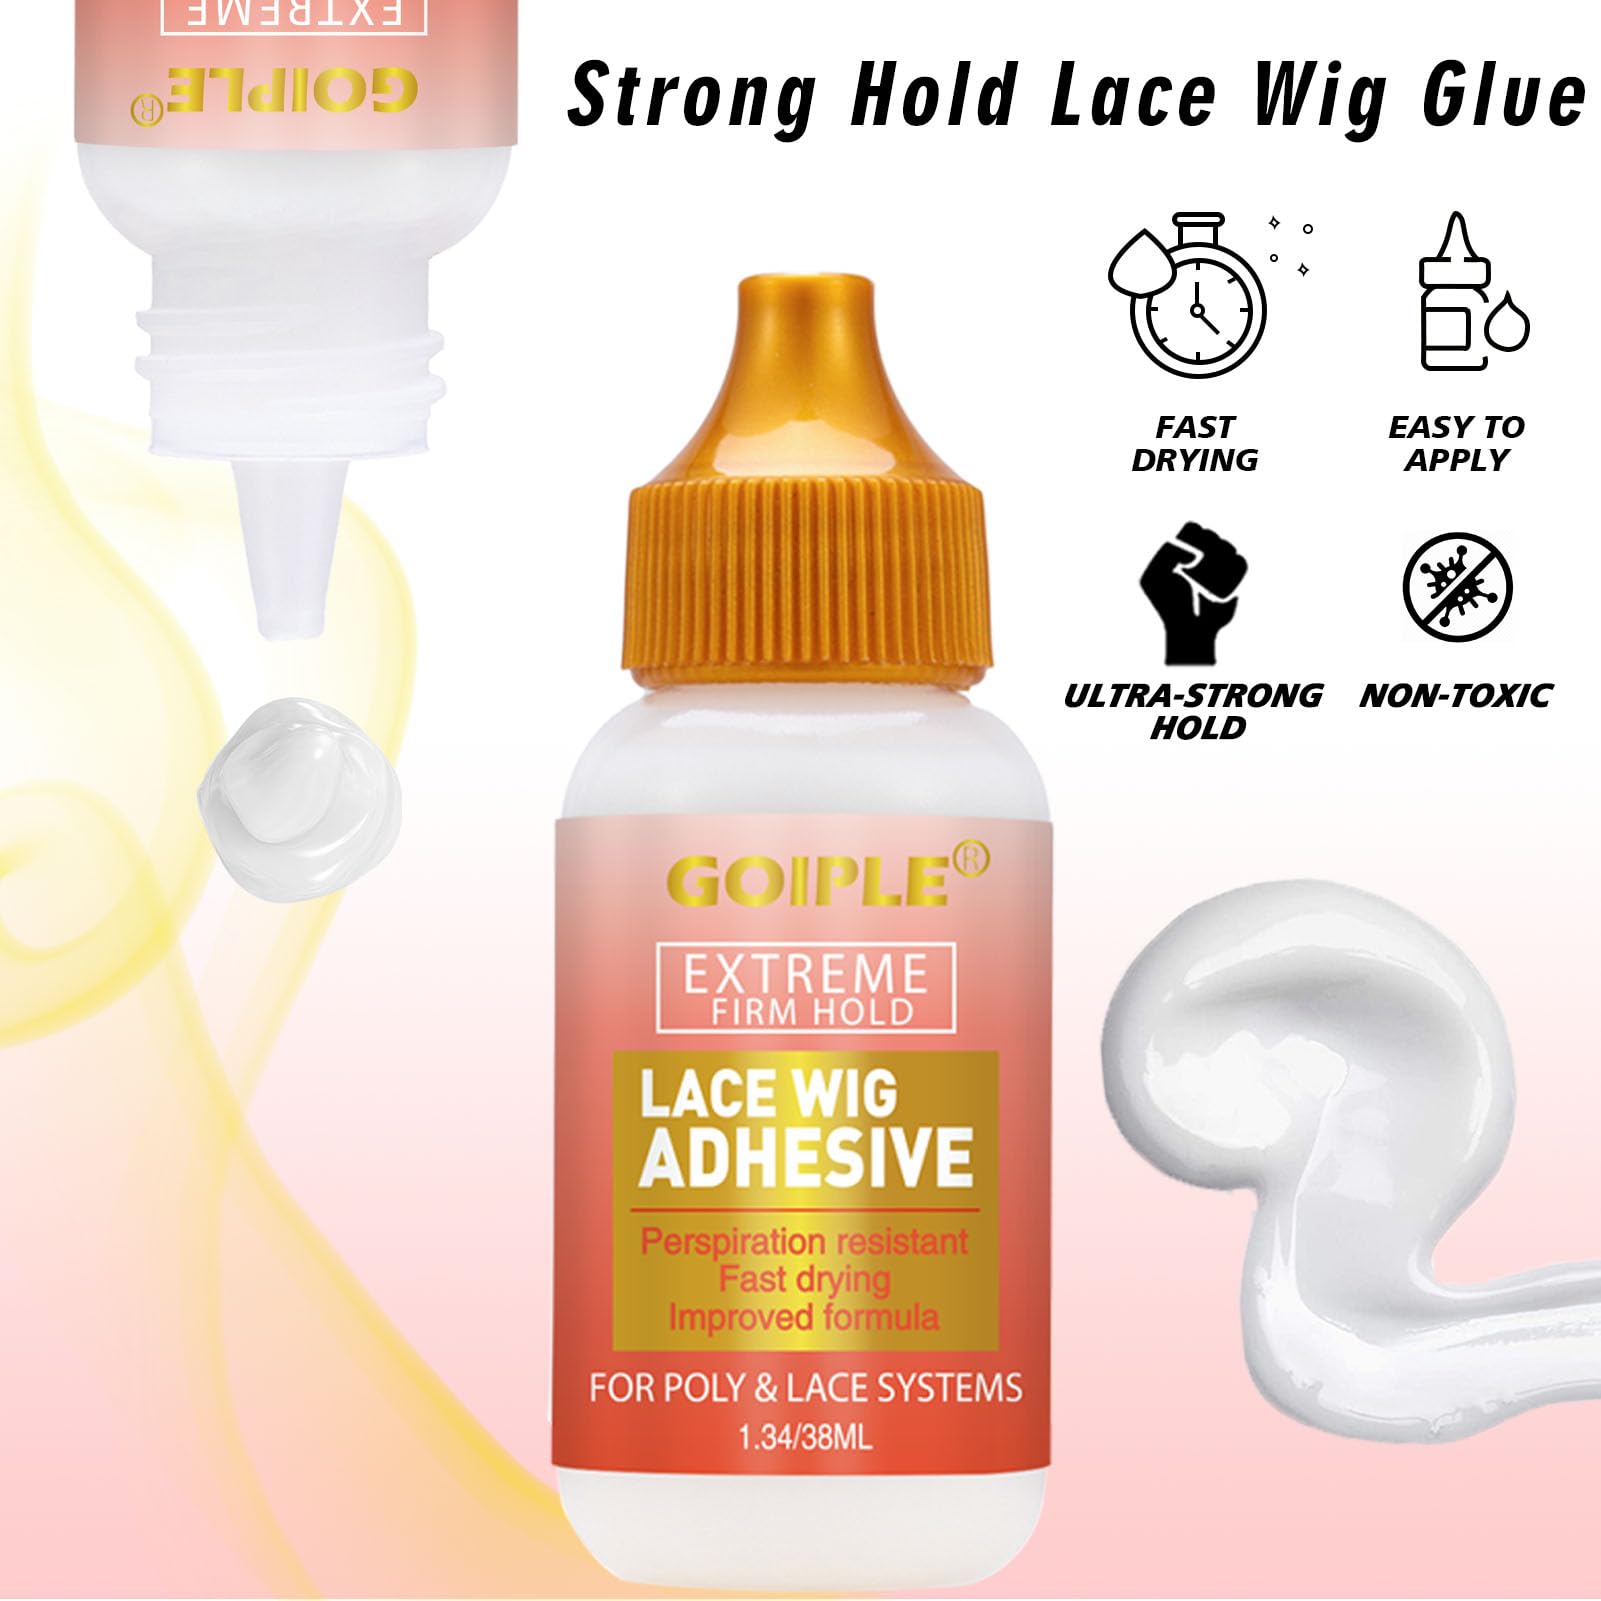  Wig Glue Spray For Front Lace Wig Lace Melting Spray For  Wigs Melting Spray For Lace Wigs Lace Bond Spray Lace Glue Kit Wig Install  Kit